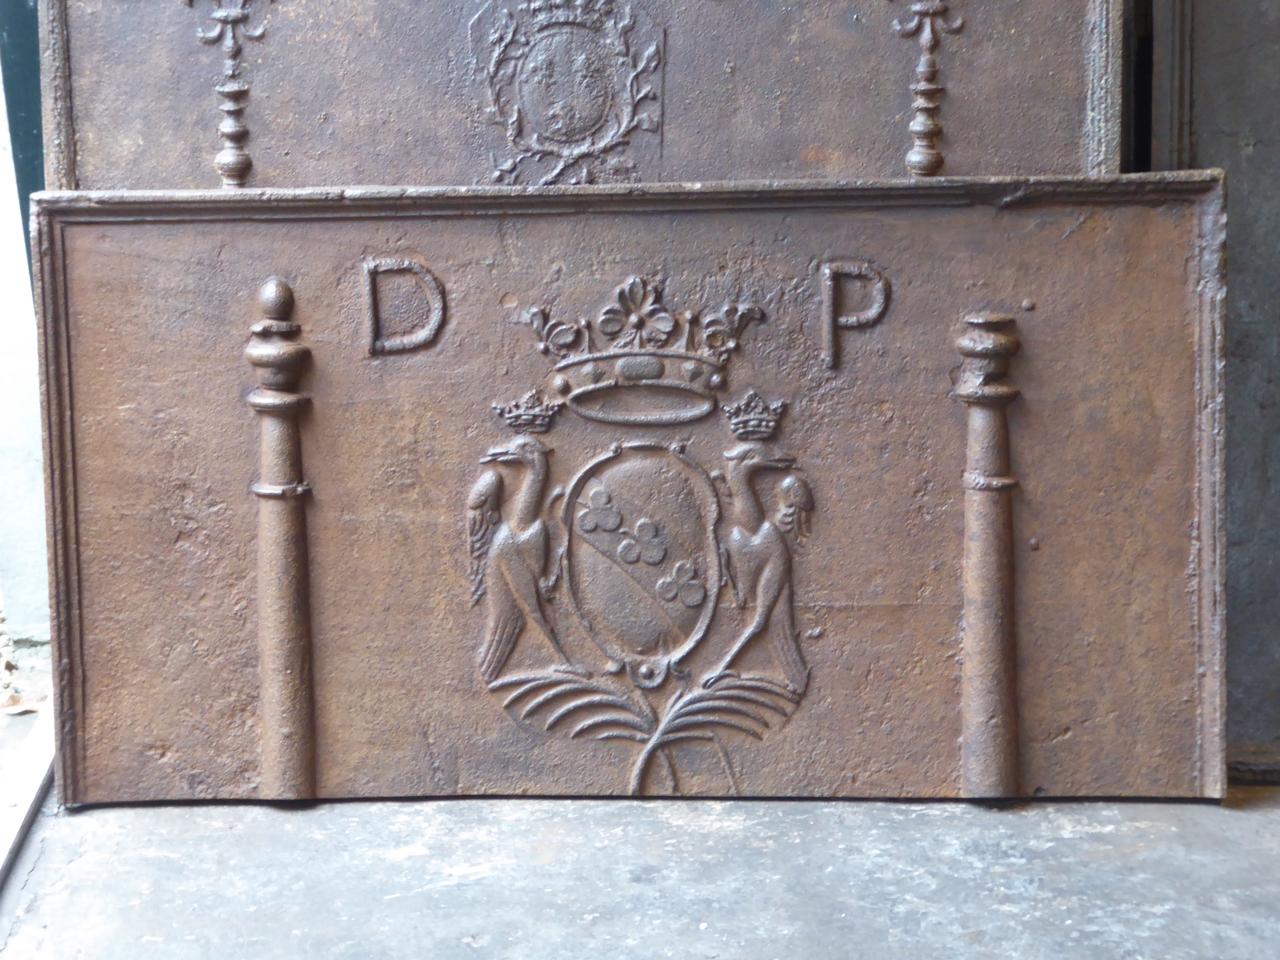 17th century French fireback with two pillars of Hercules, a coat of arms and the monogram D.P. The pillars stand for the club of Hercules and symbolize strength. The style of the fireback is Louis XIV and the fireback is of the Louis XIV